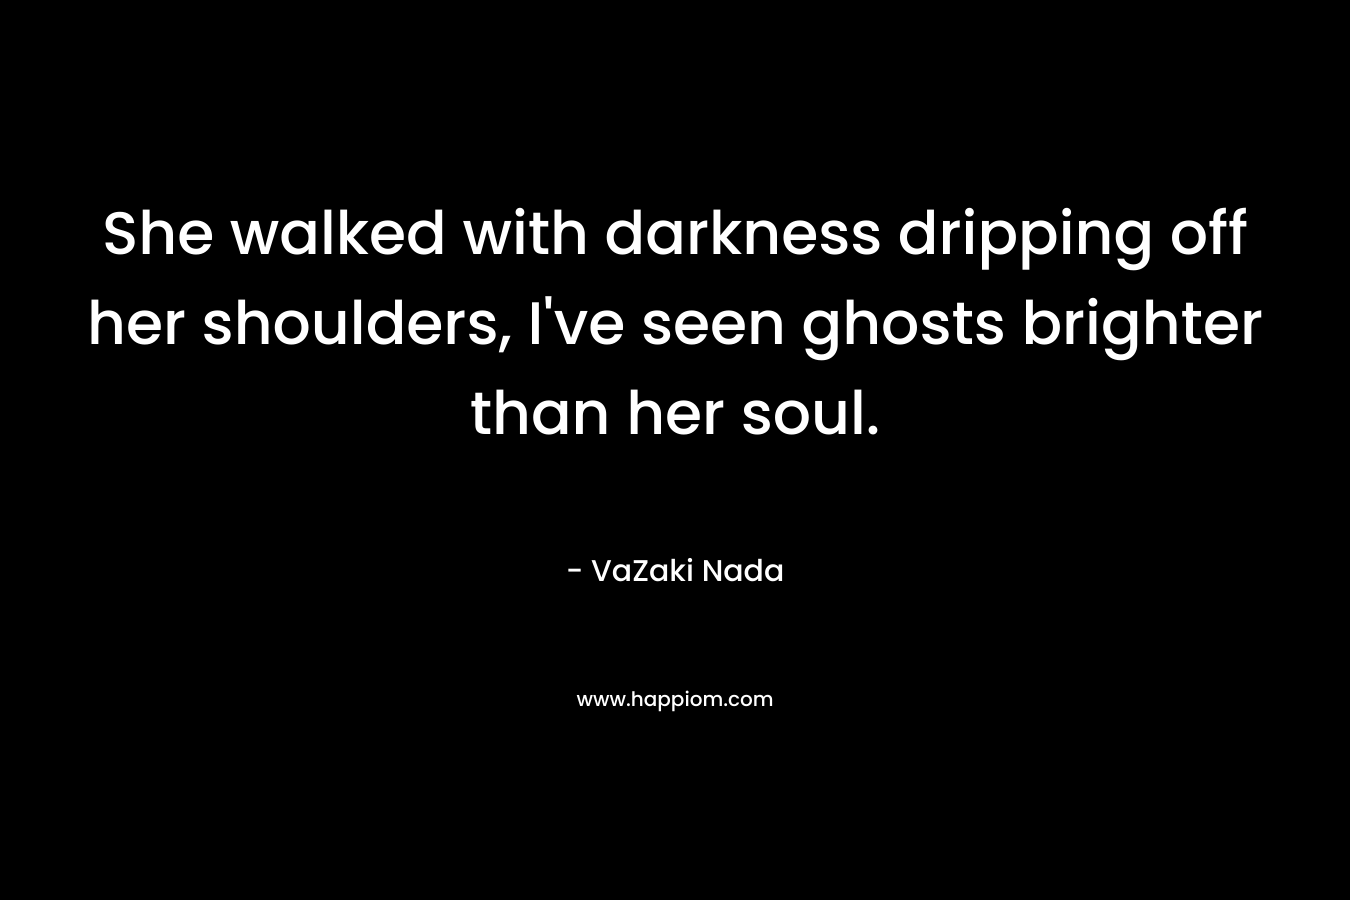 She walked with darkness dripping off her shoulders, I've seen ghosts brighter than her soul.